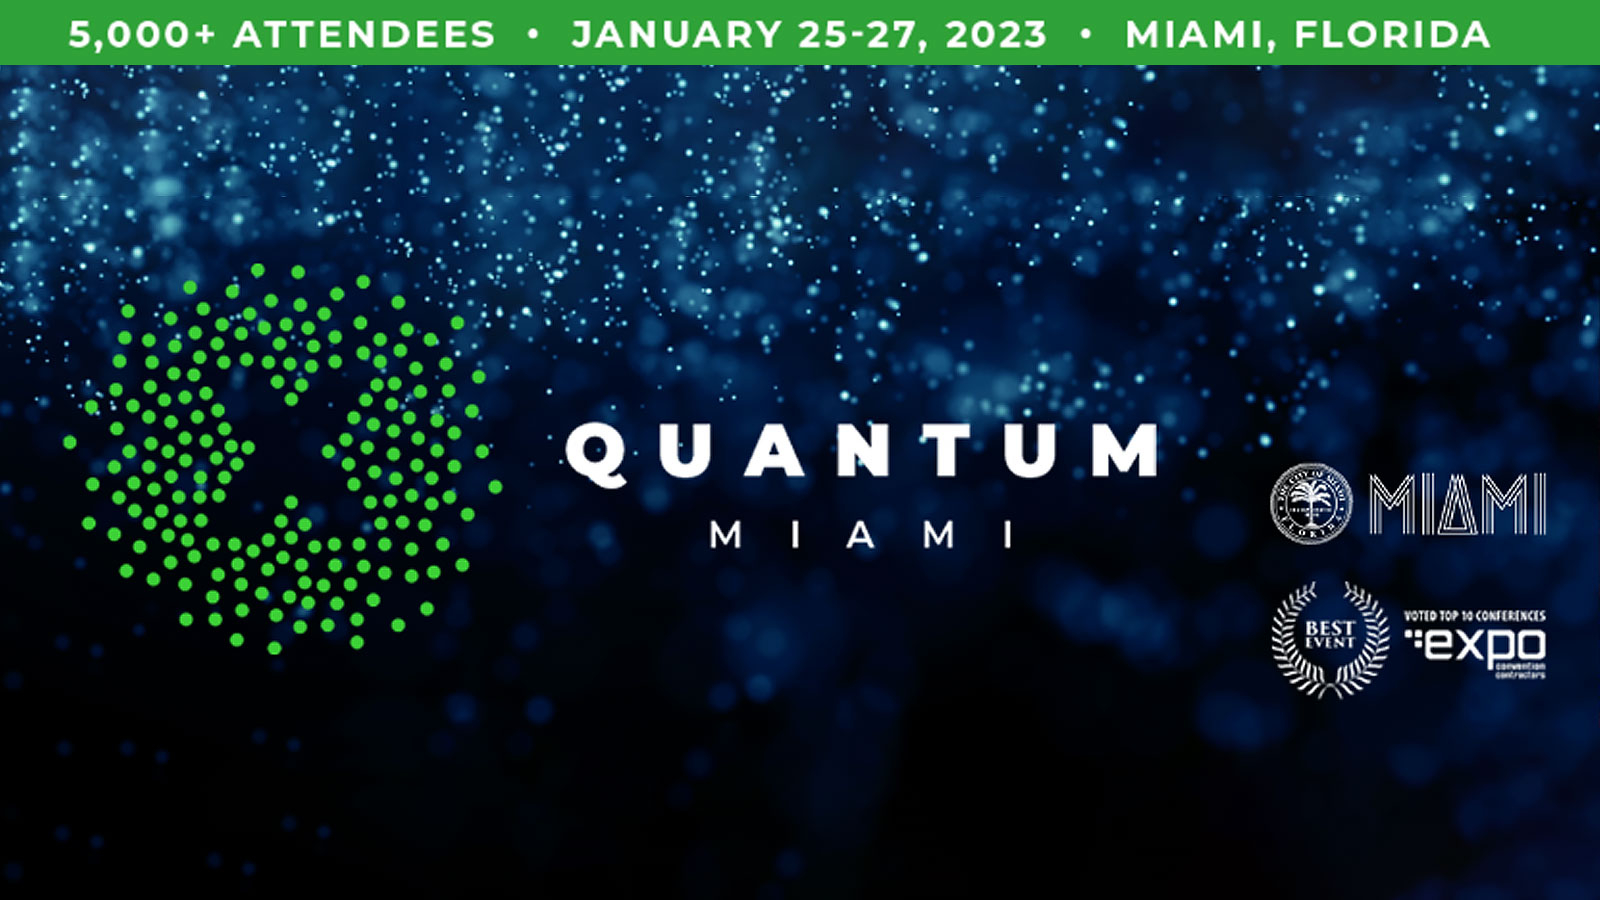 The ‘Quantum Miami’ Conference Turns The Heat Up On Crypto Winter From January 25-27th, During Miami Blockchain Week